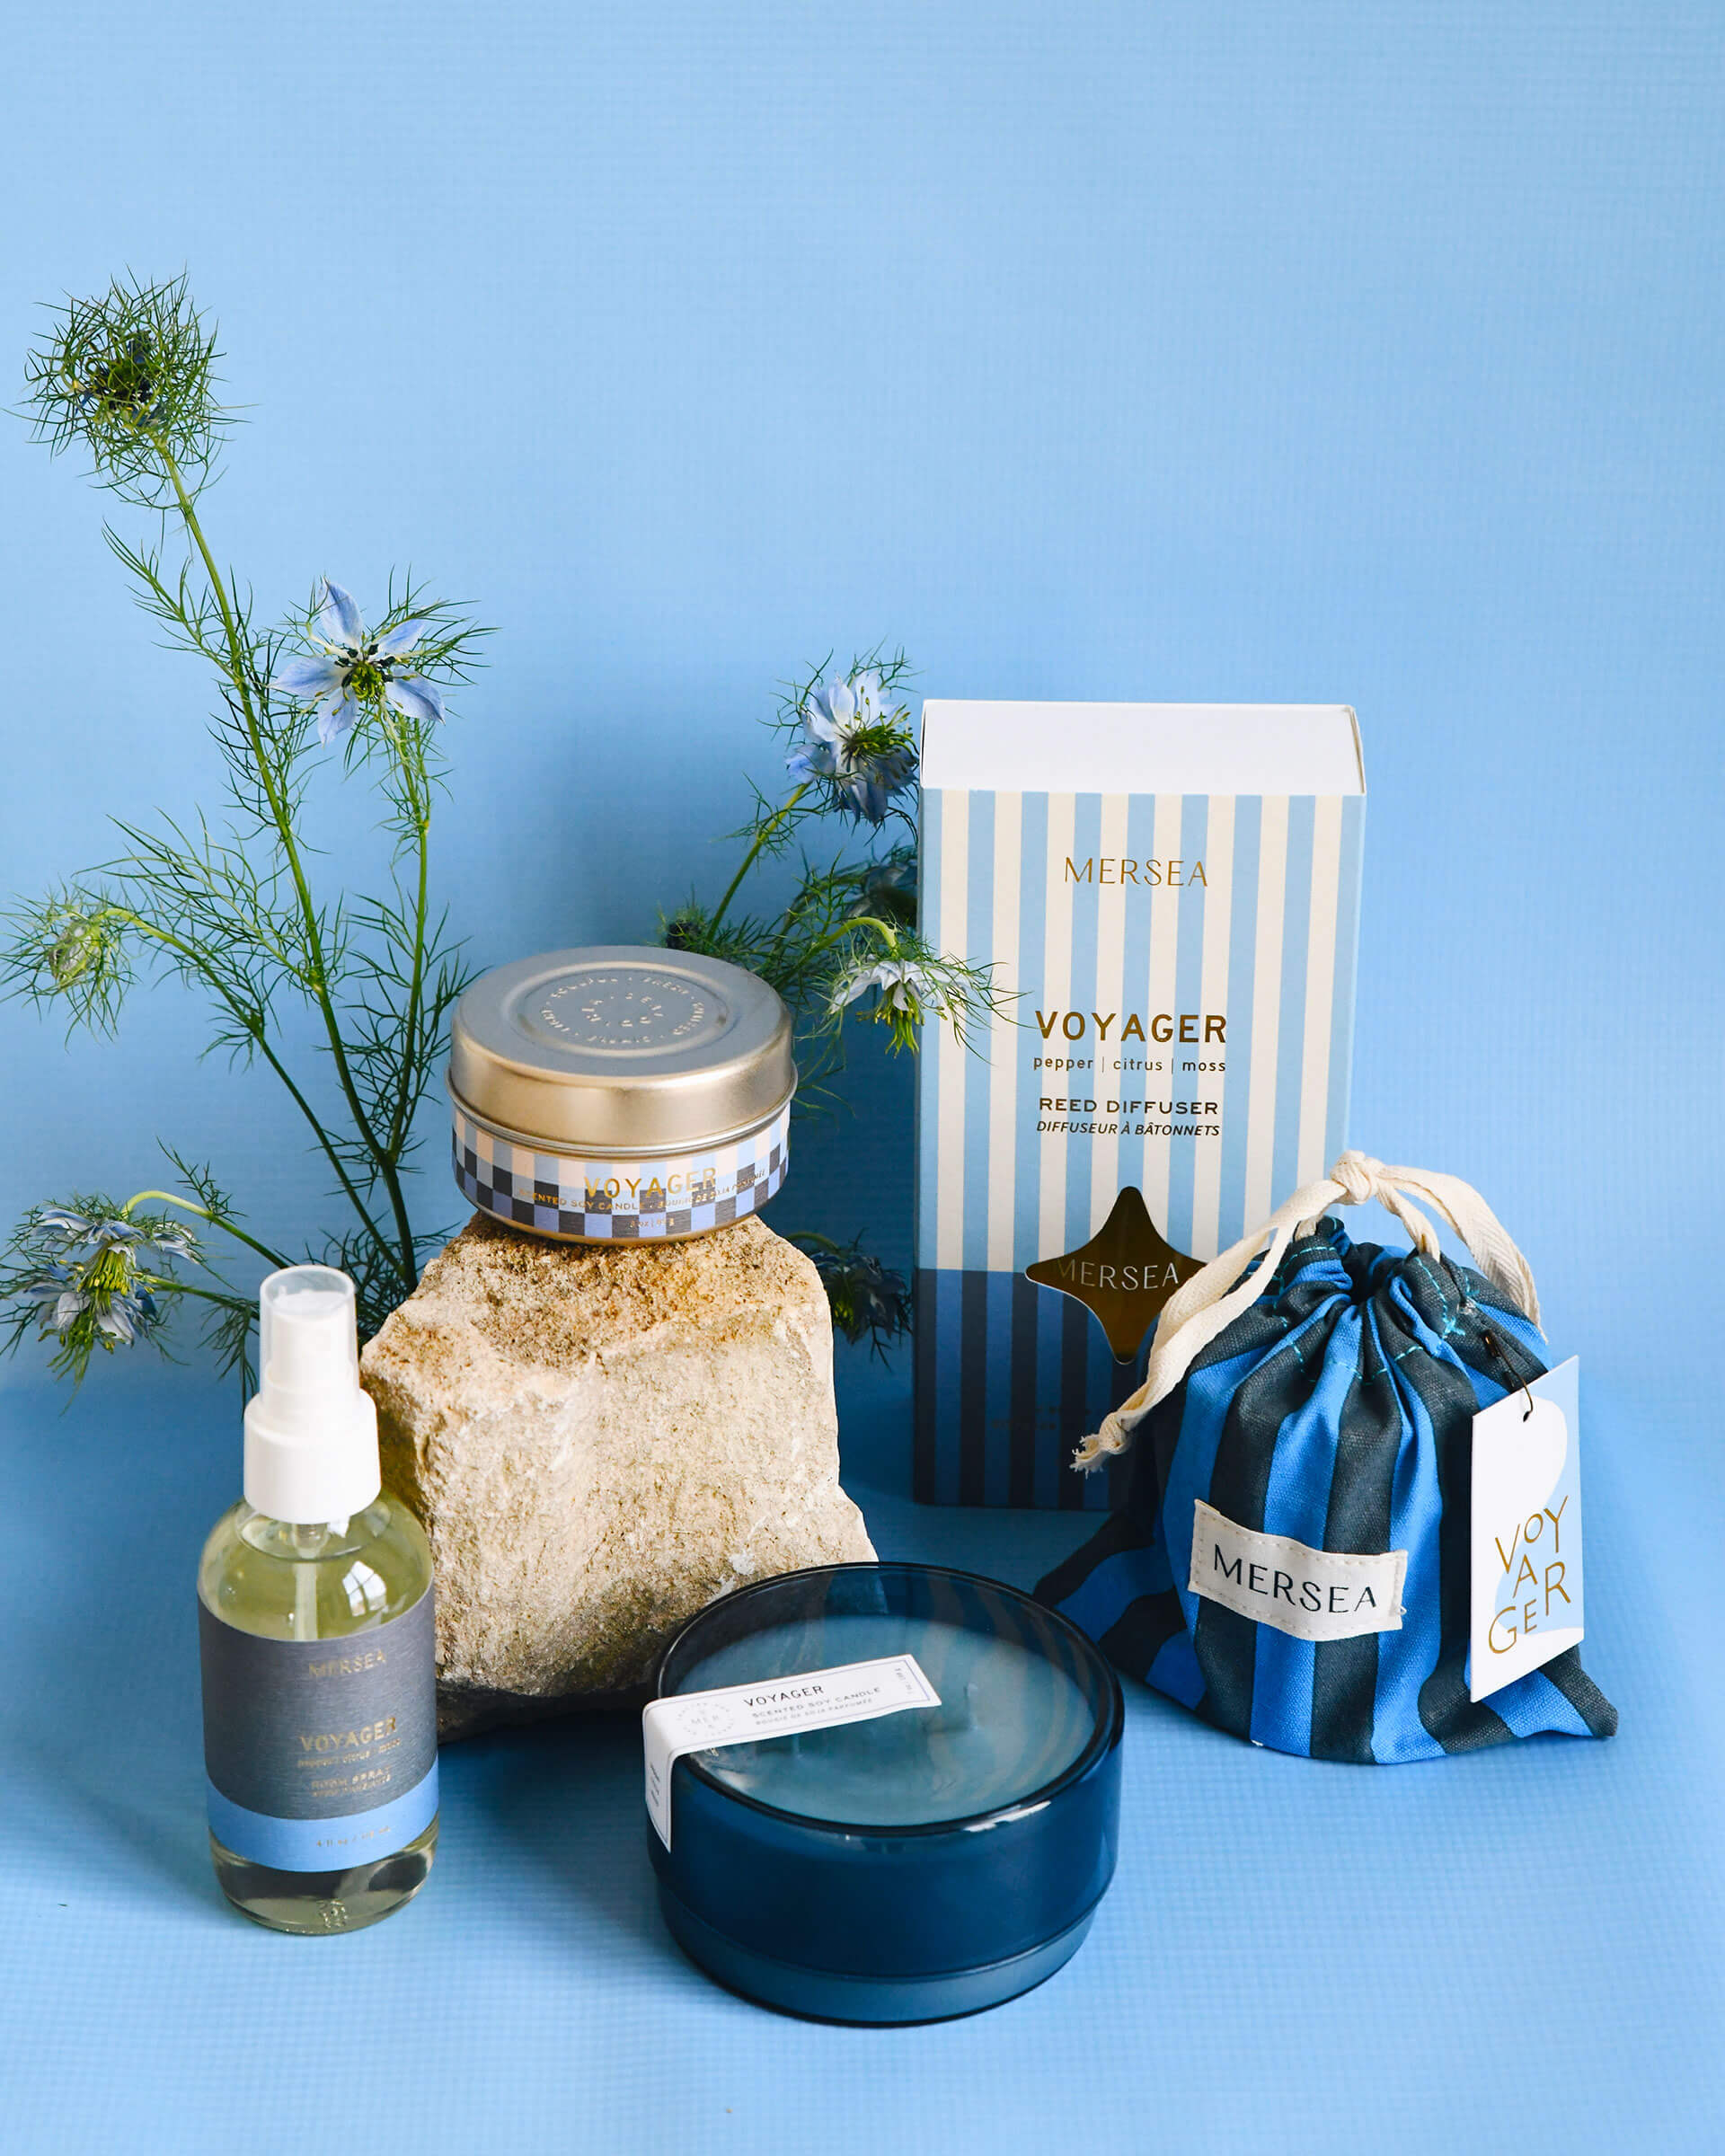 Voyager scented collection of candles, room spray and diffuser in front of blue background